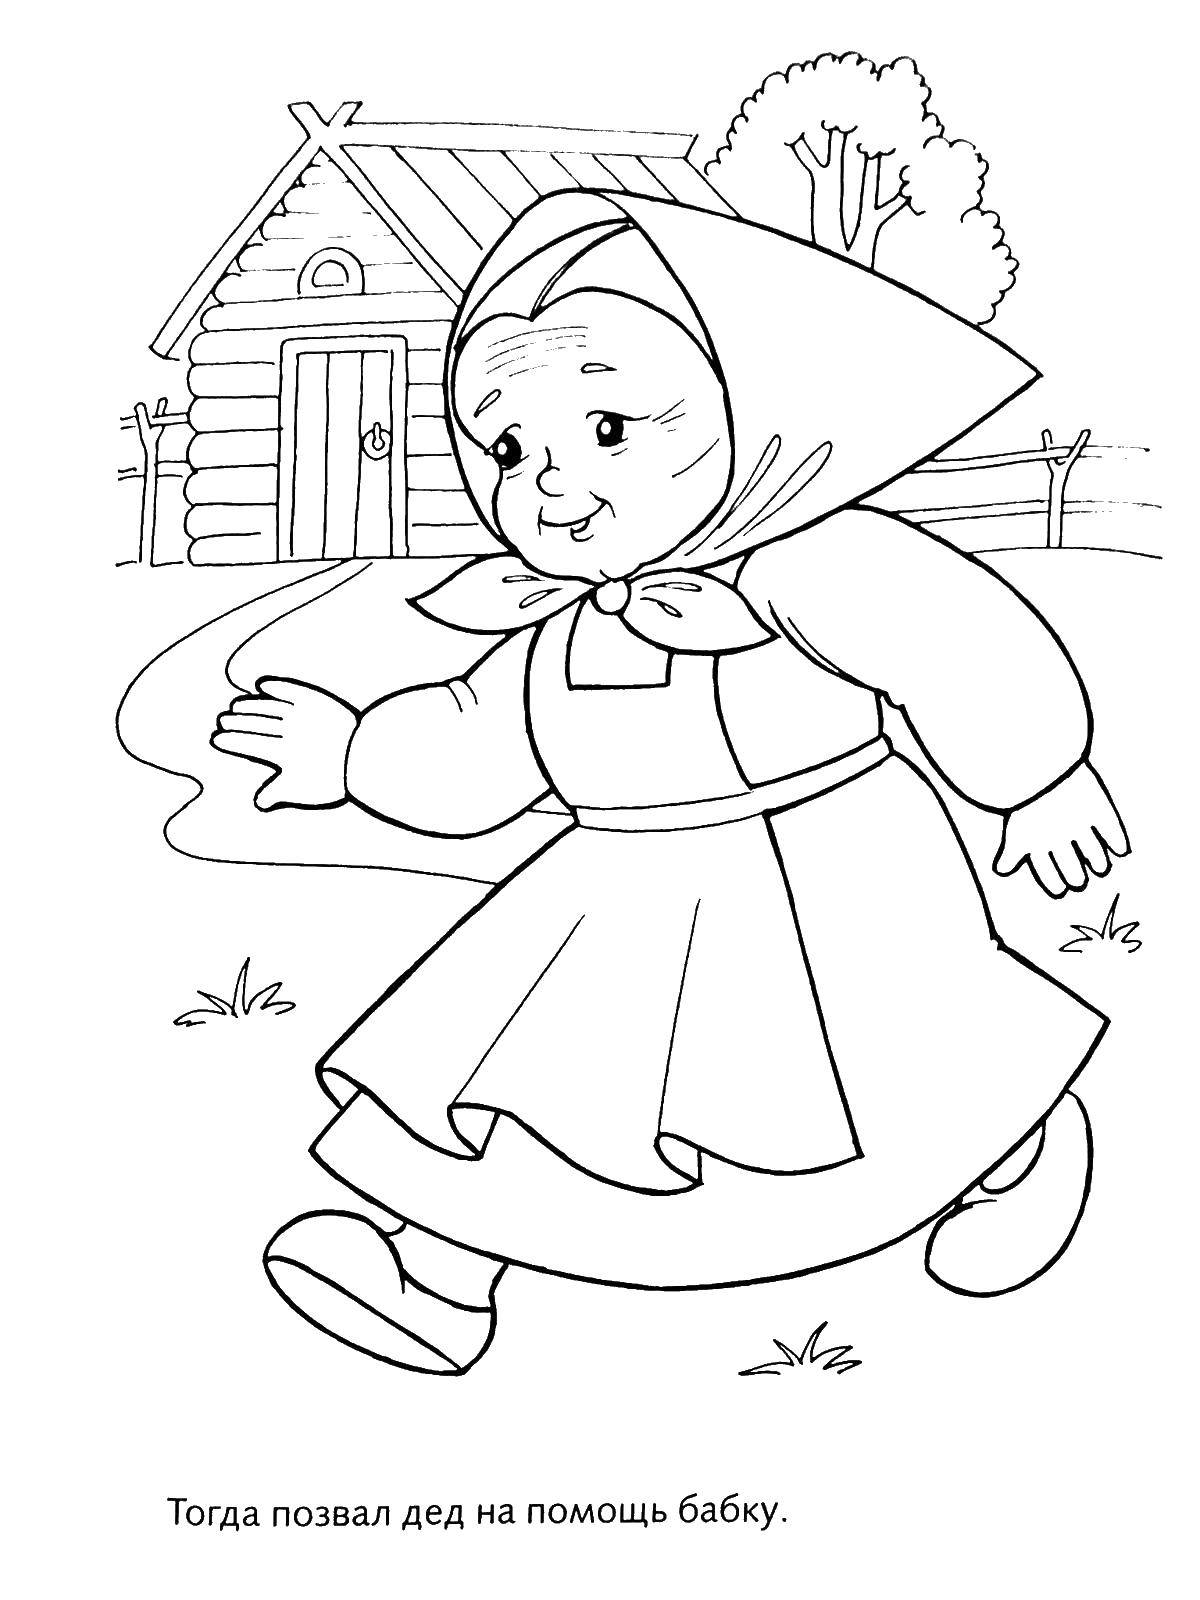 Turnip Coloring Page Online Coloring Pages Coloring Page Grandfather Called My